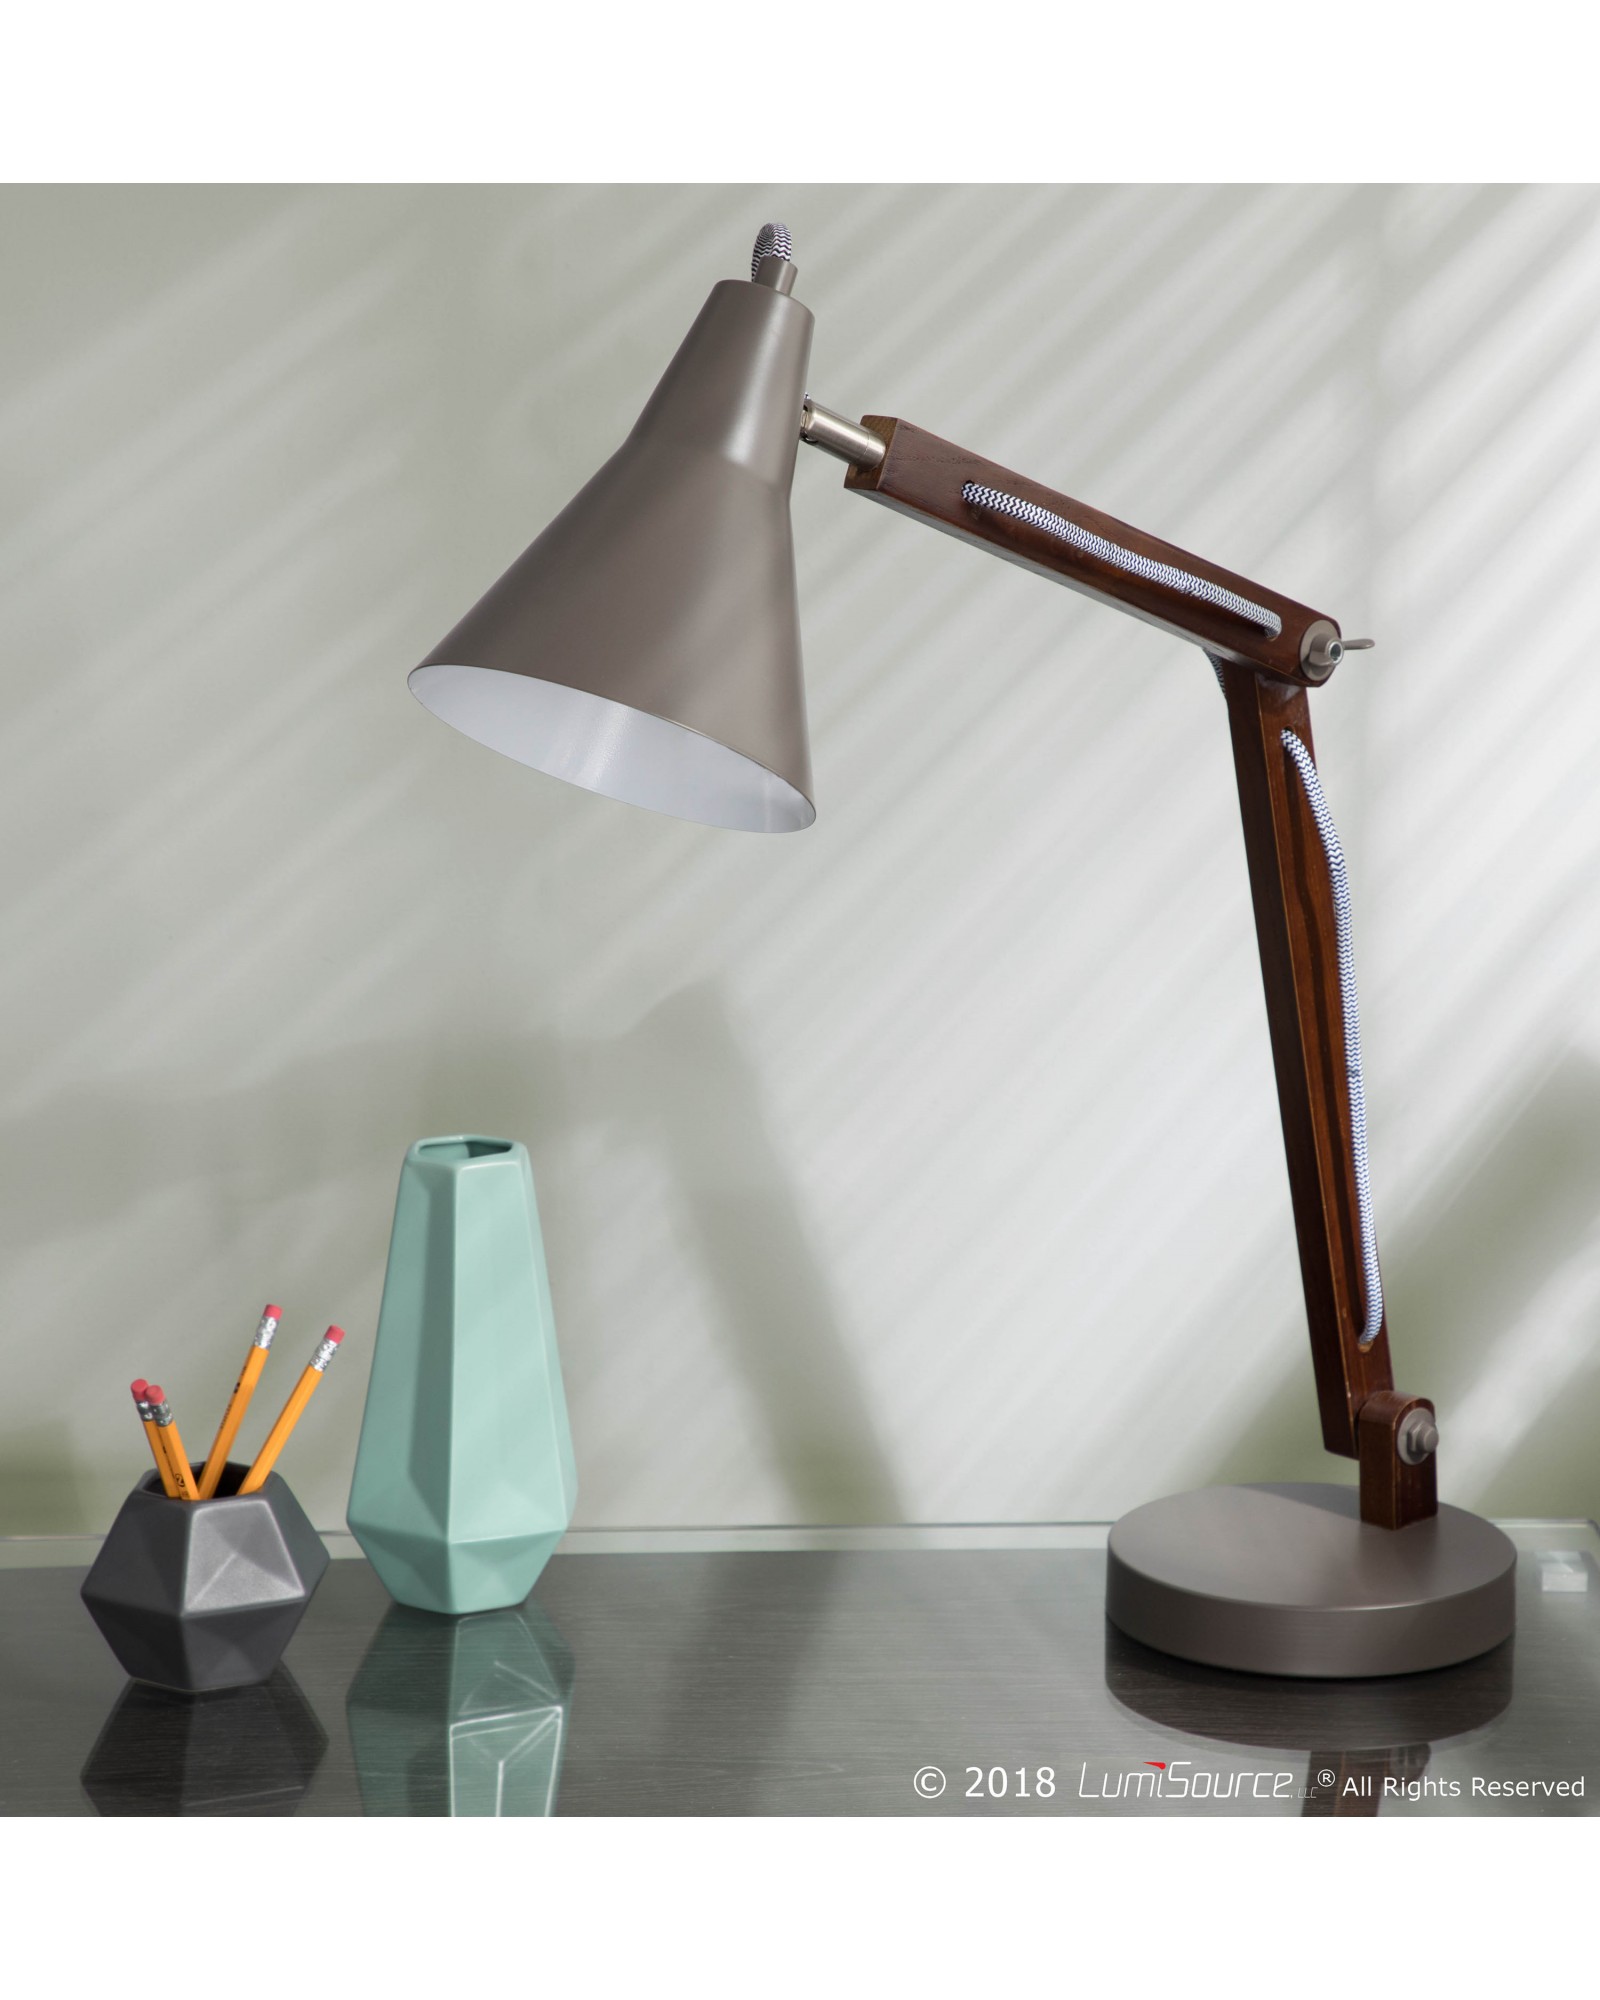 Oregon Industrial Adjustable Table Lamp in Walnut and Grey